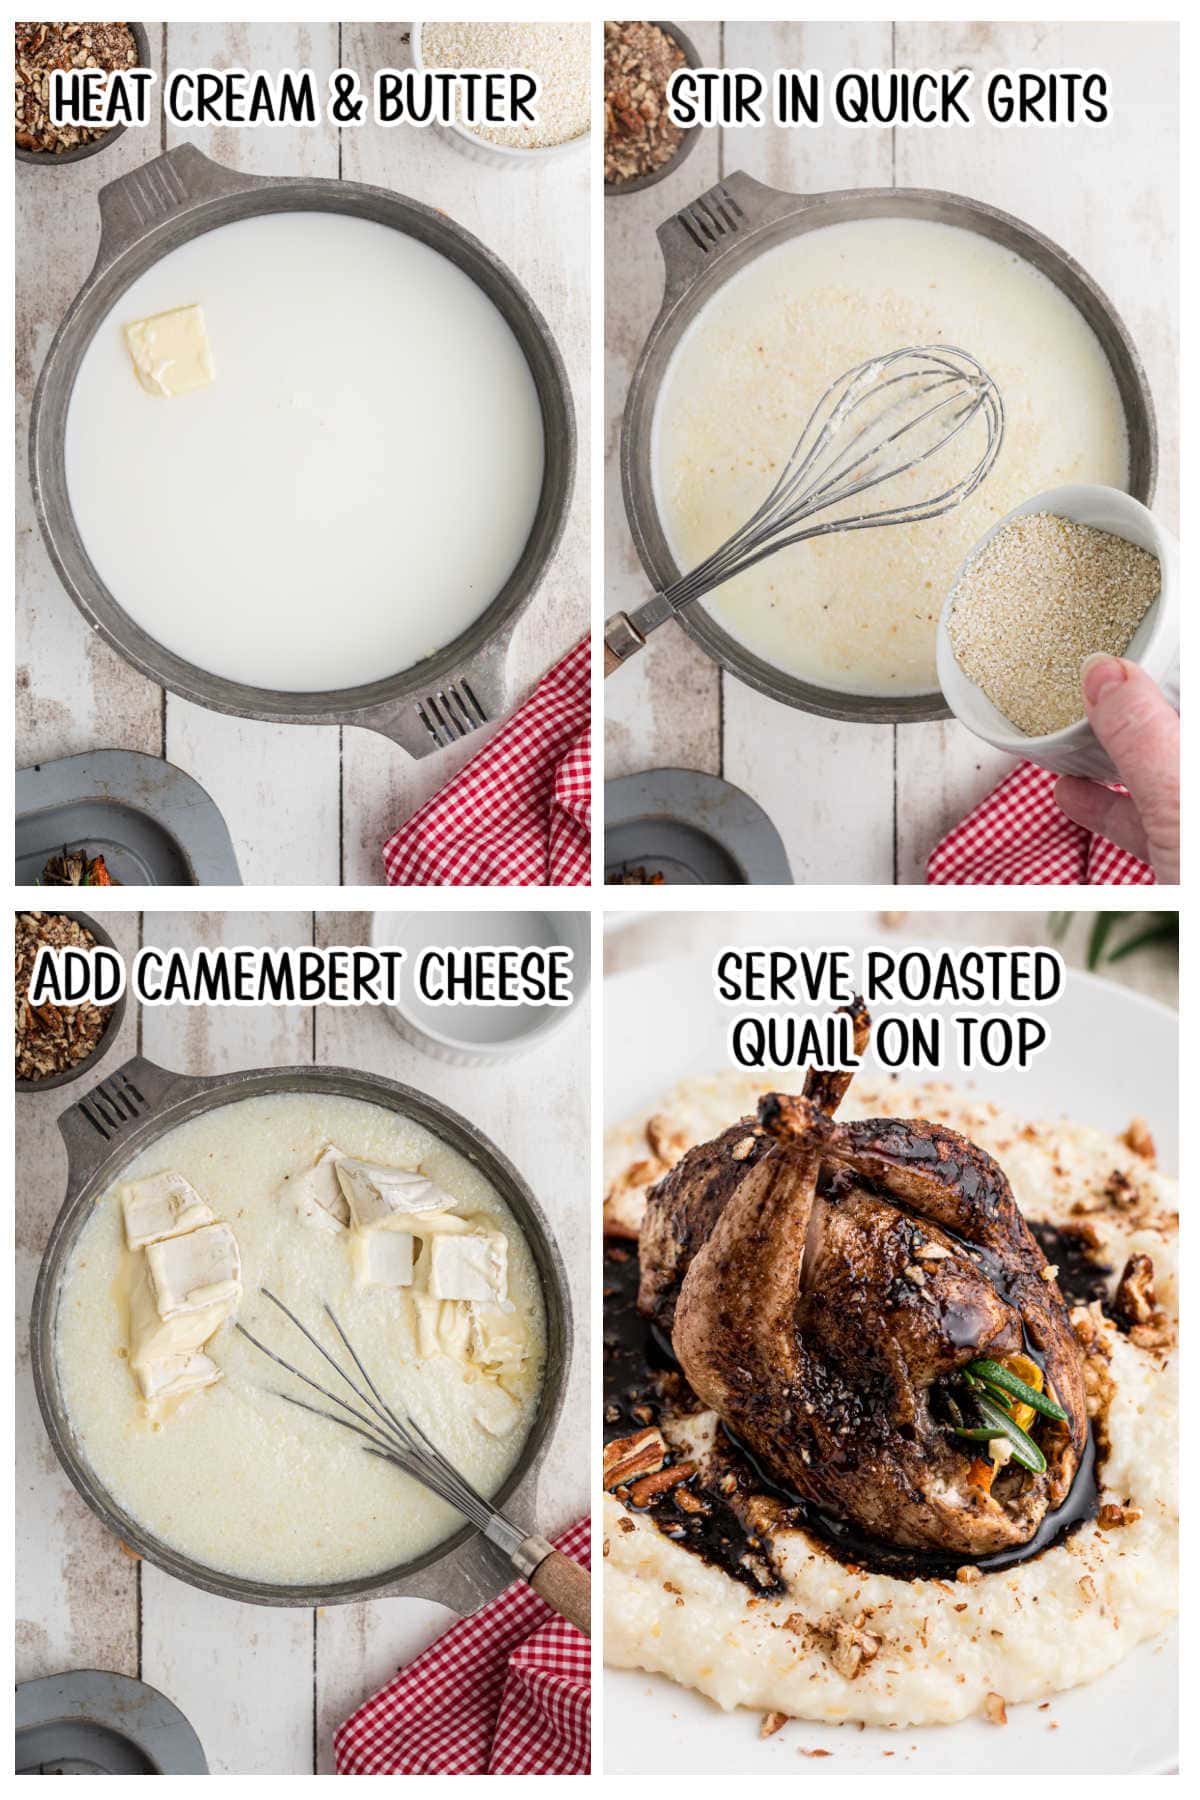 Step by step images showing how to make cheese grits.